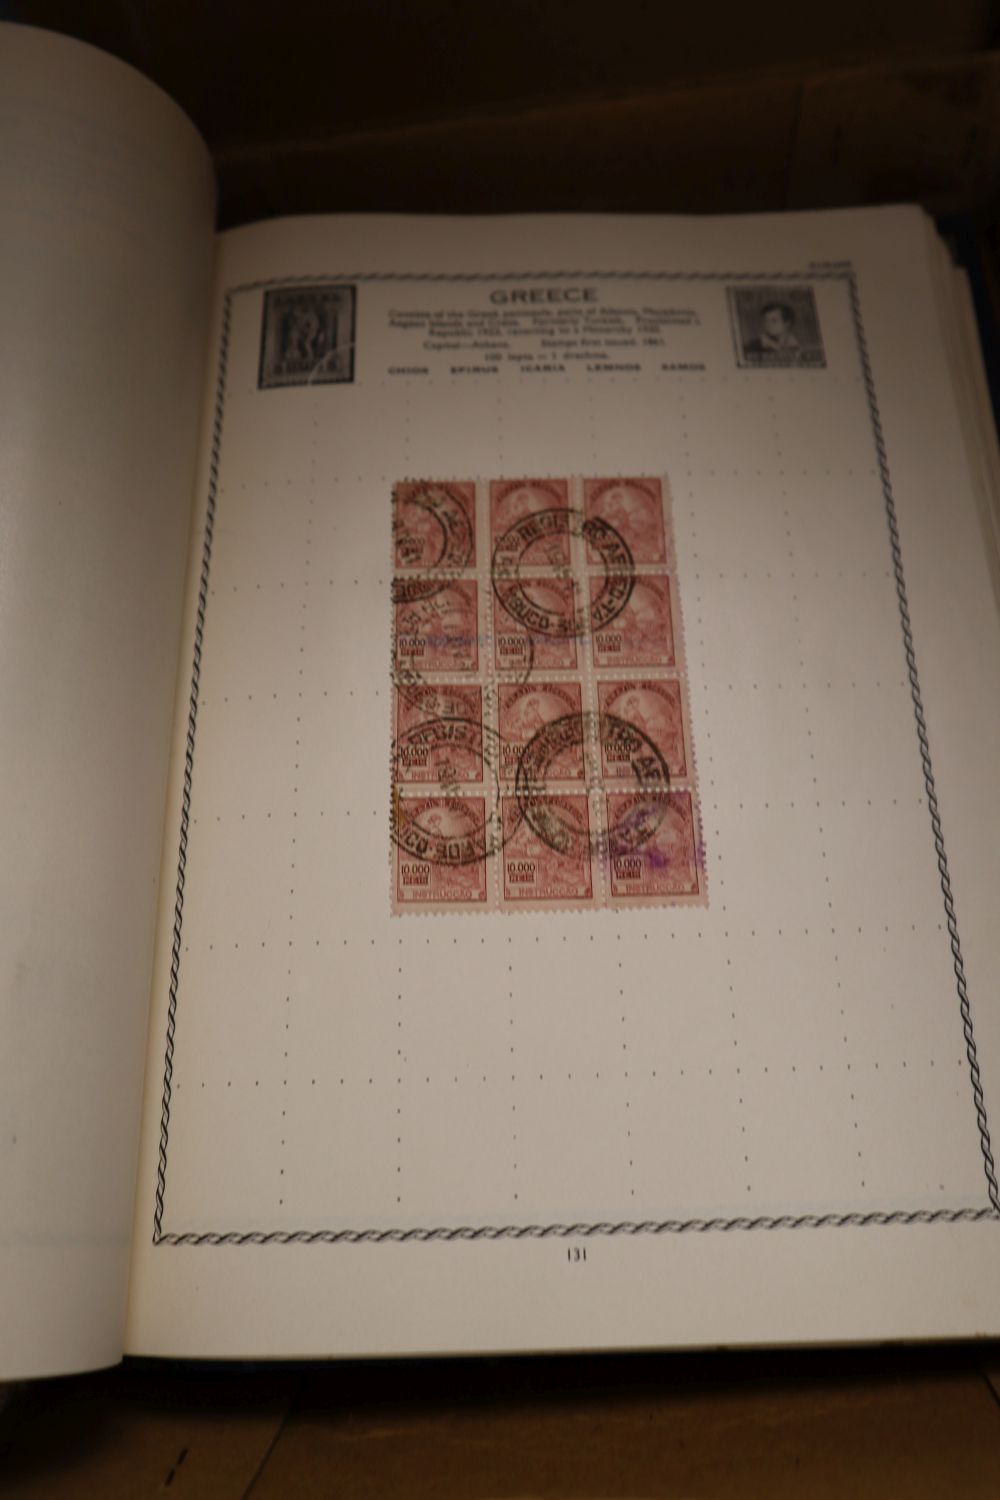 A Triumph Album containing a small collection of GB and World stamps